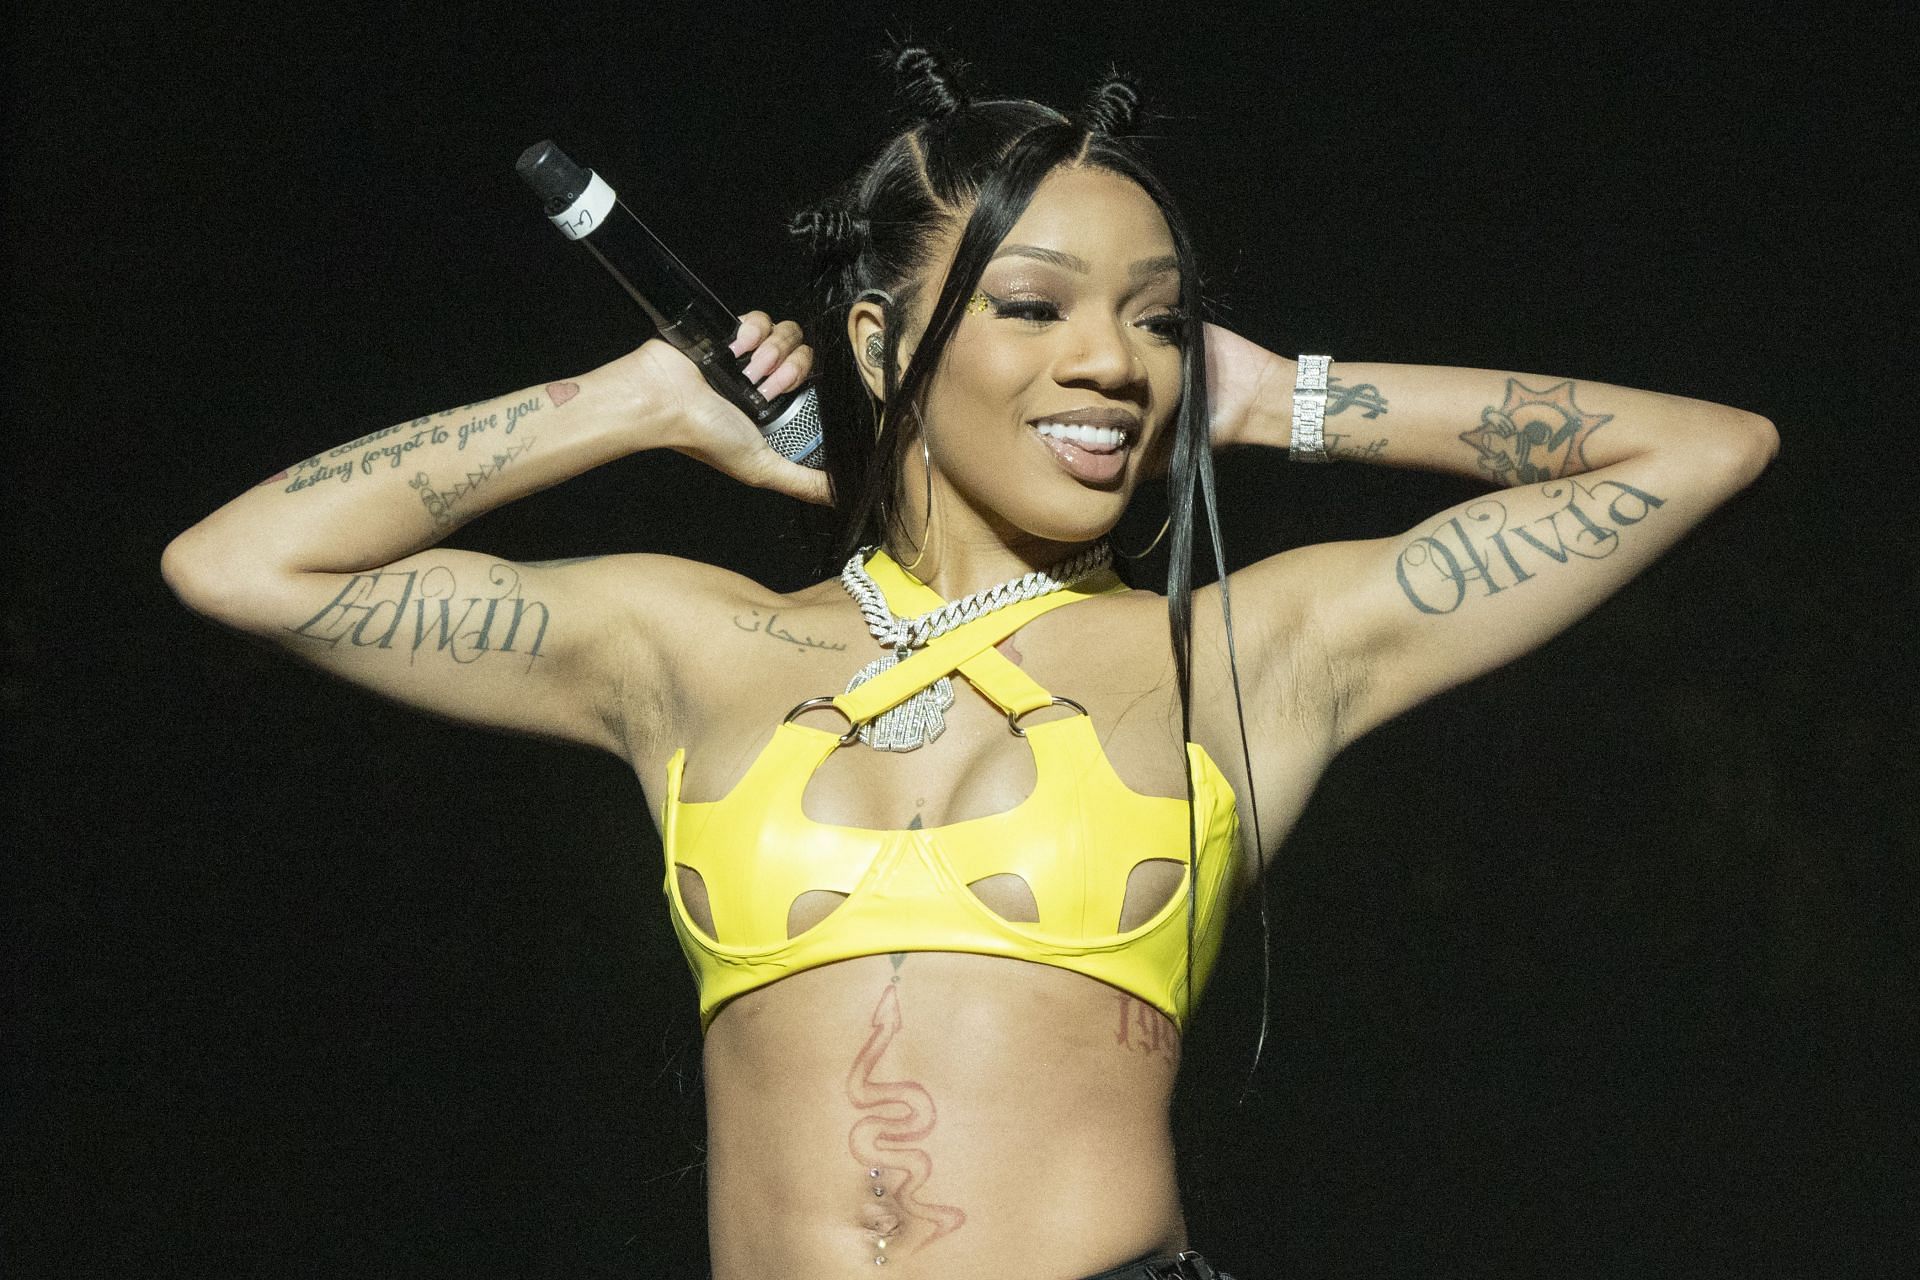 Megan Thee Stallion Performs During The Hot Girl Summer Tour At The Target Center In Minneapolis